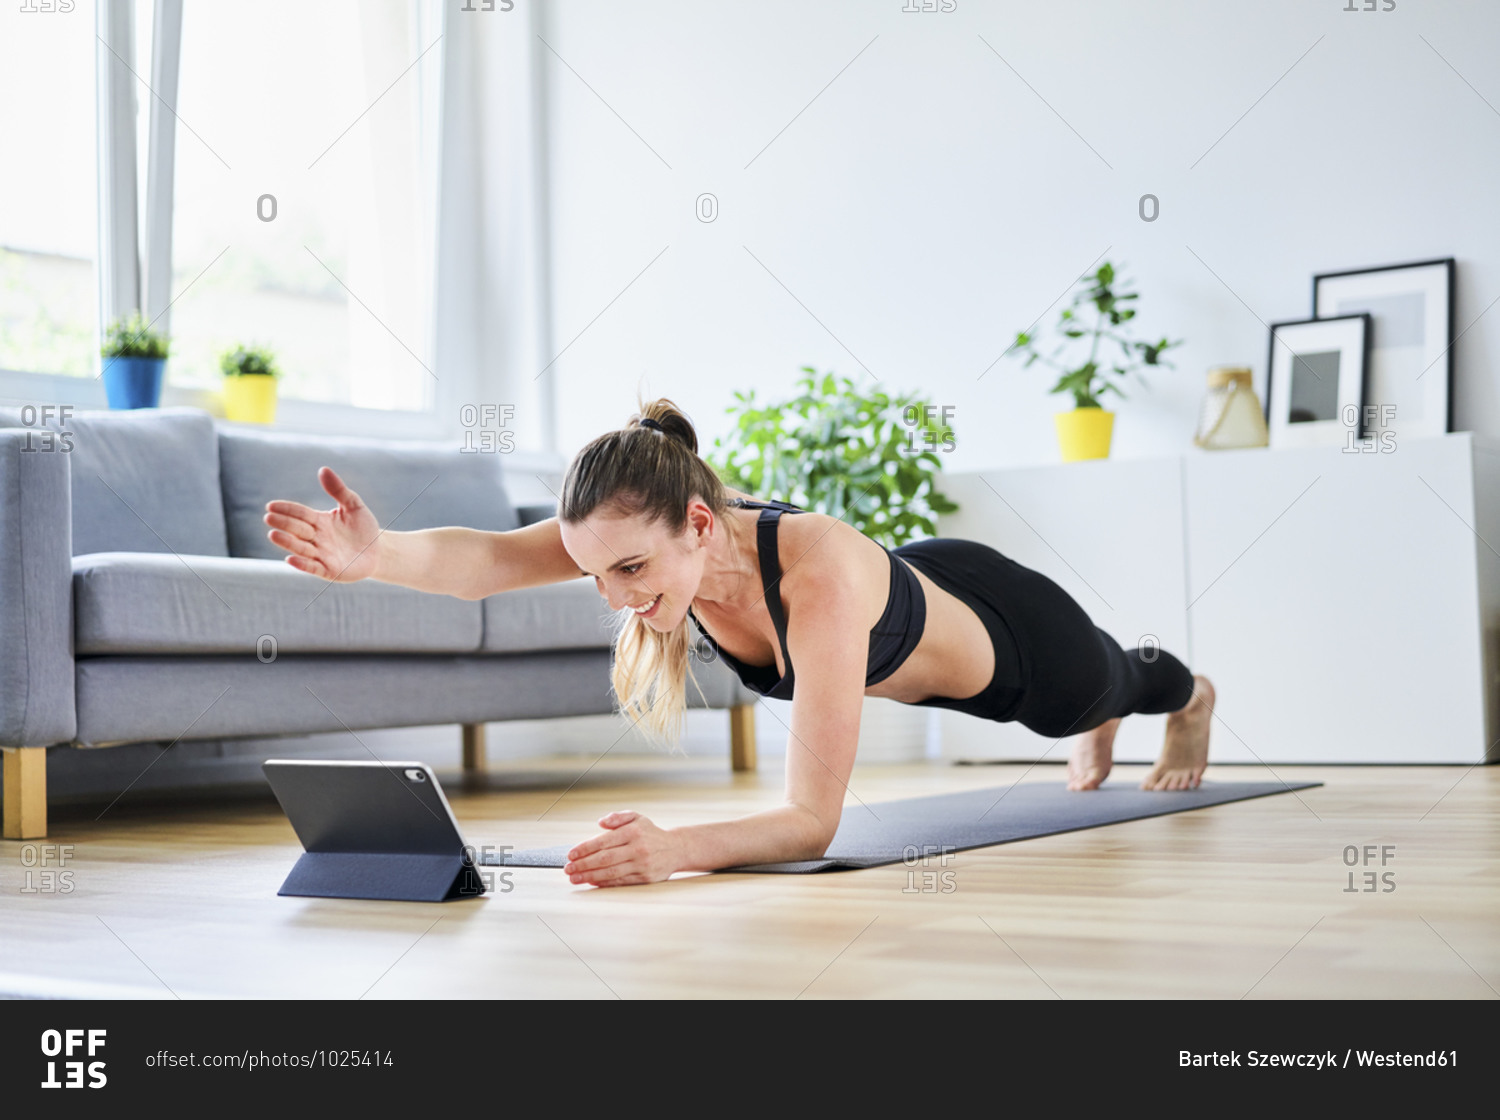 Woman extending arm during plank pose while learning exercise on internet through tablet PC